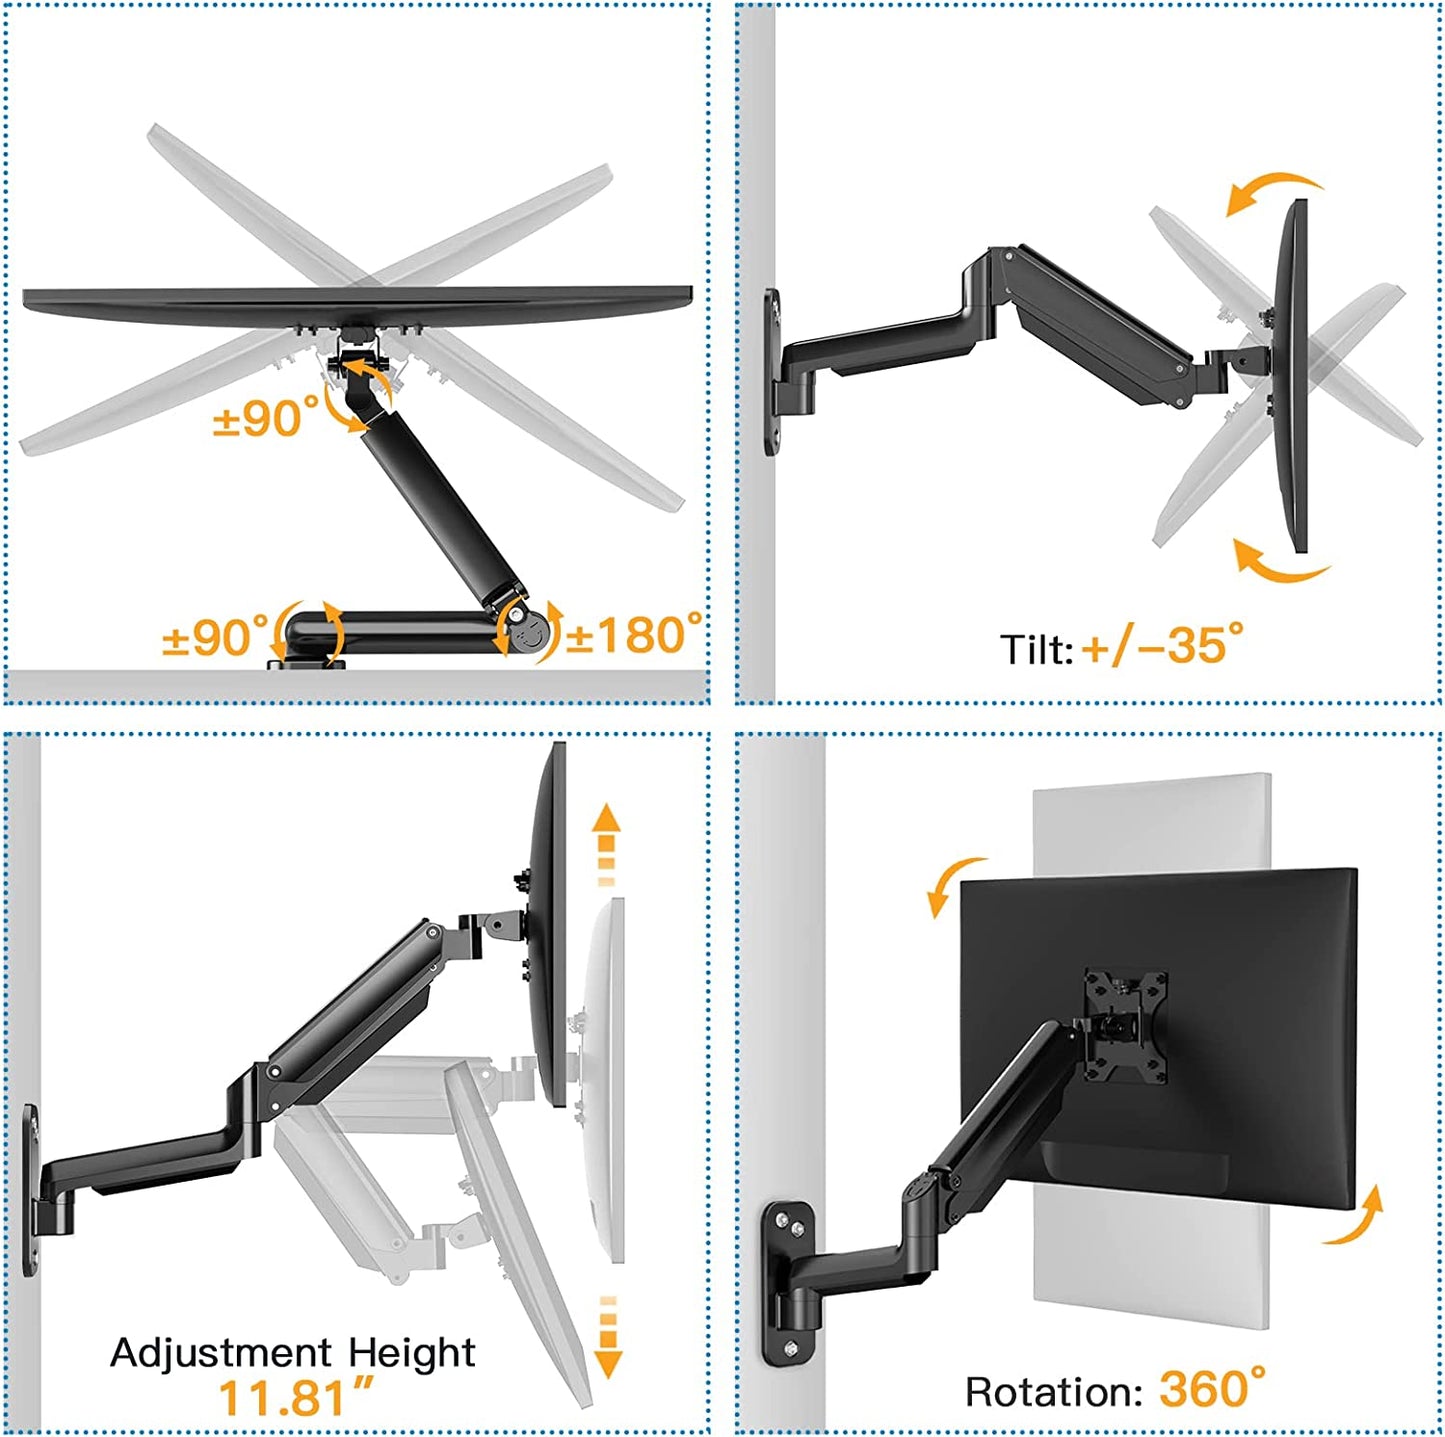 Monitor Wall Mount For 17" To 32" Screens